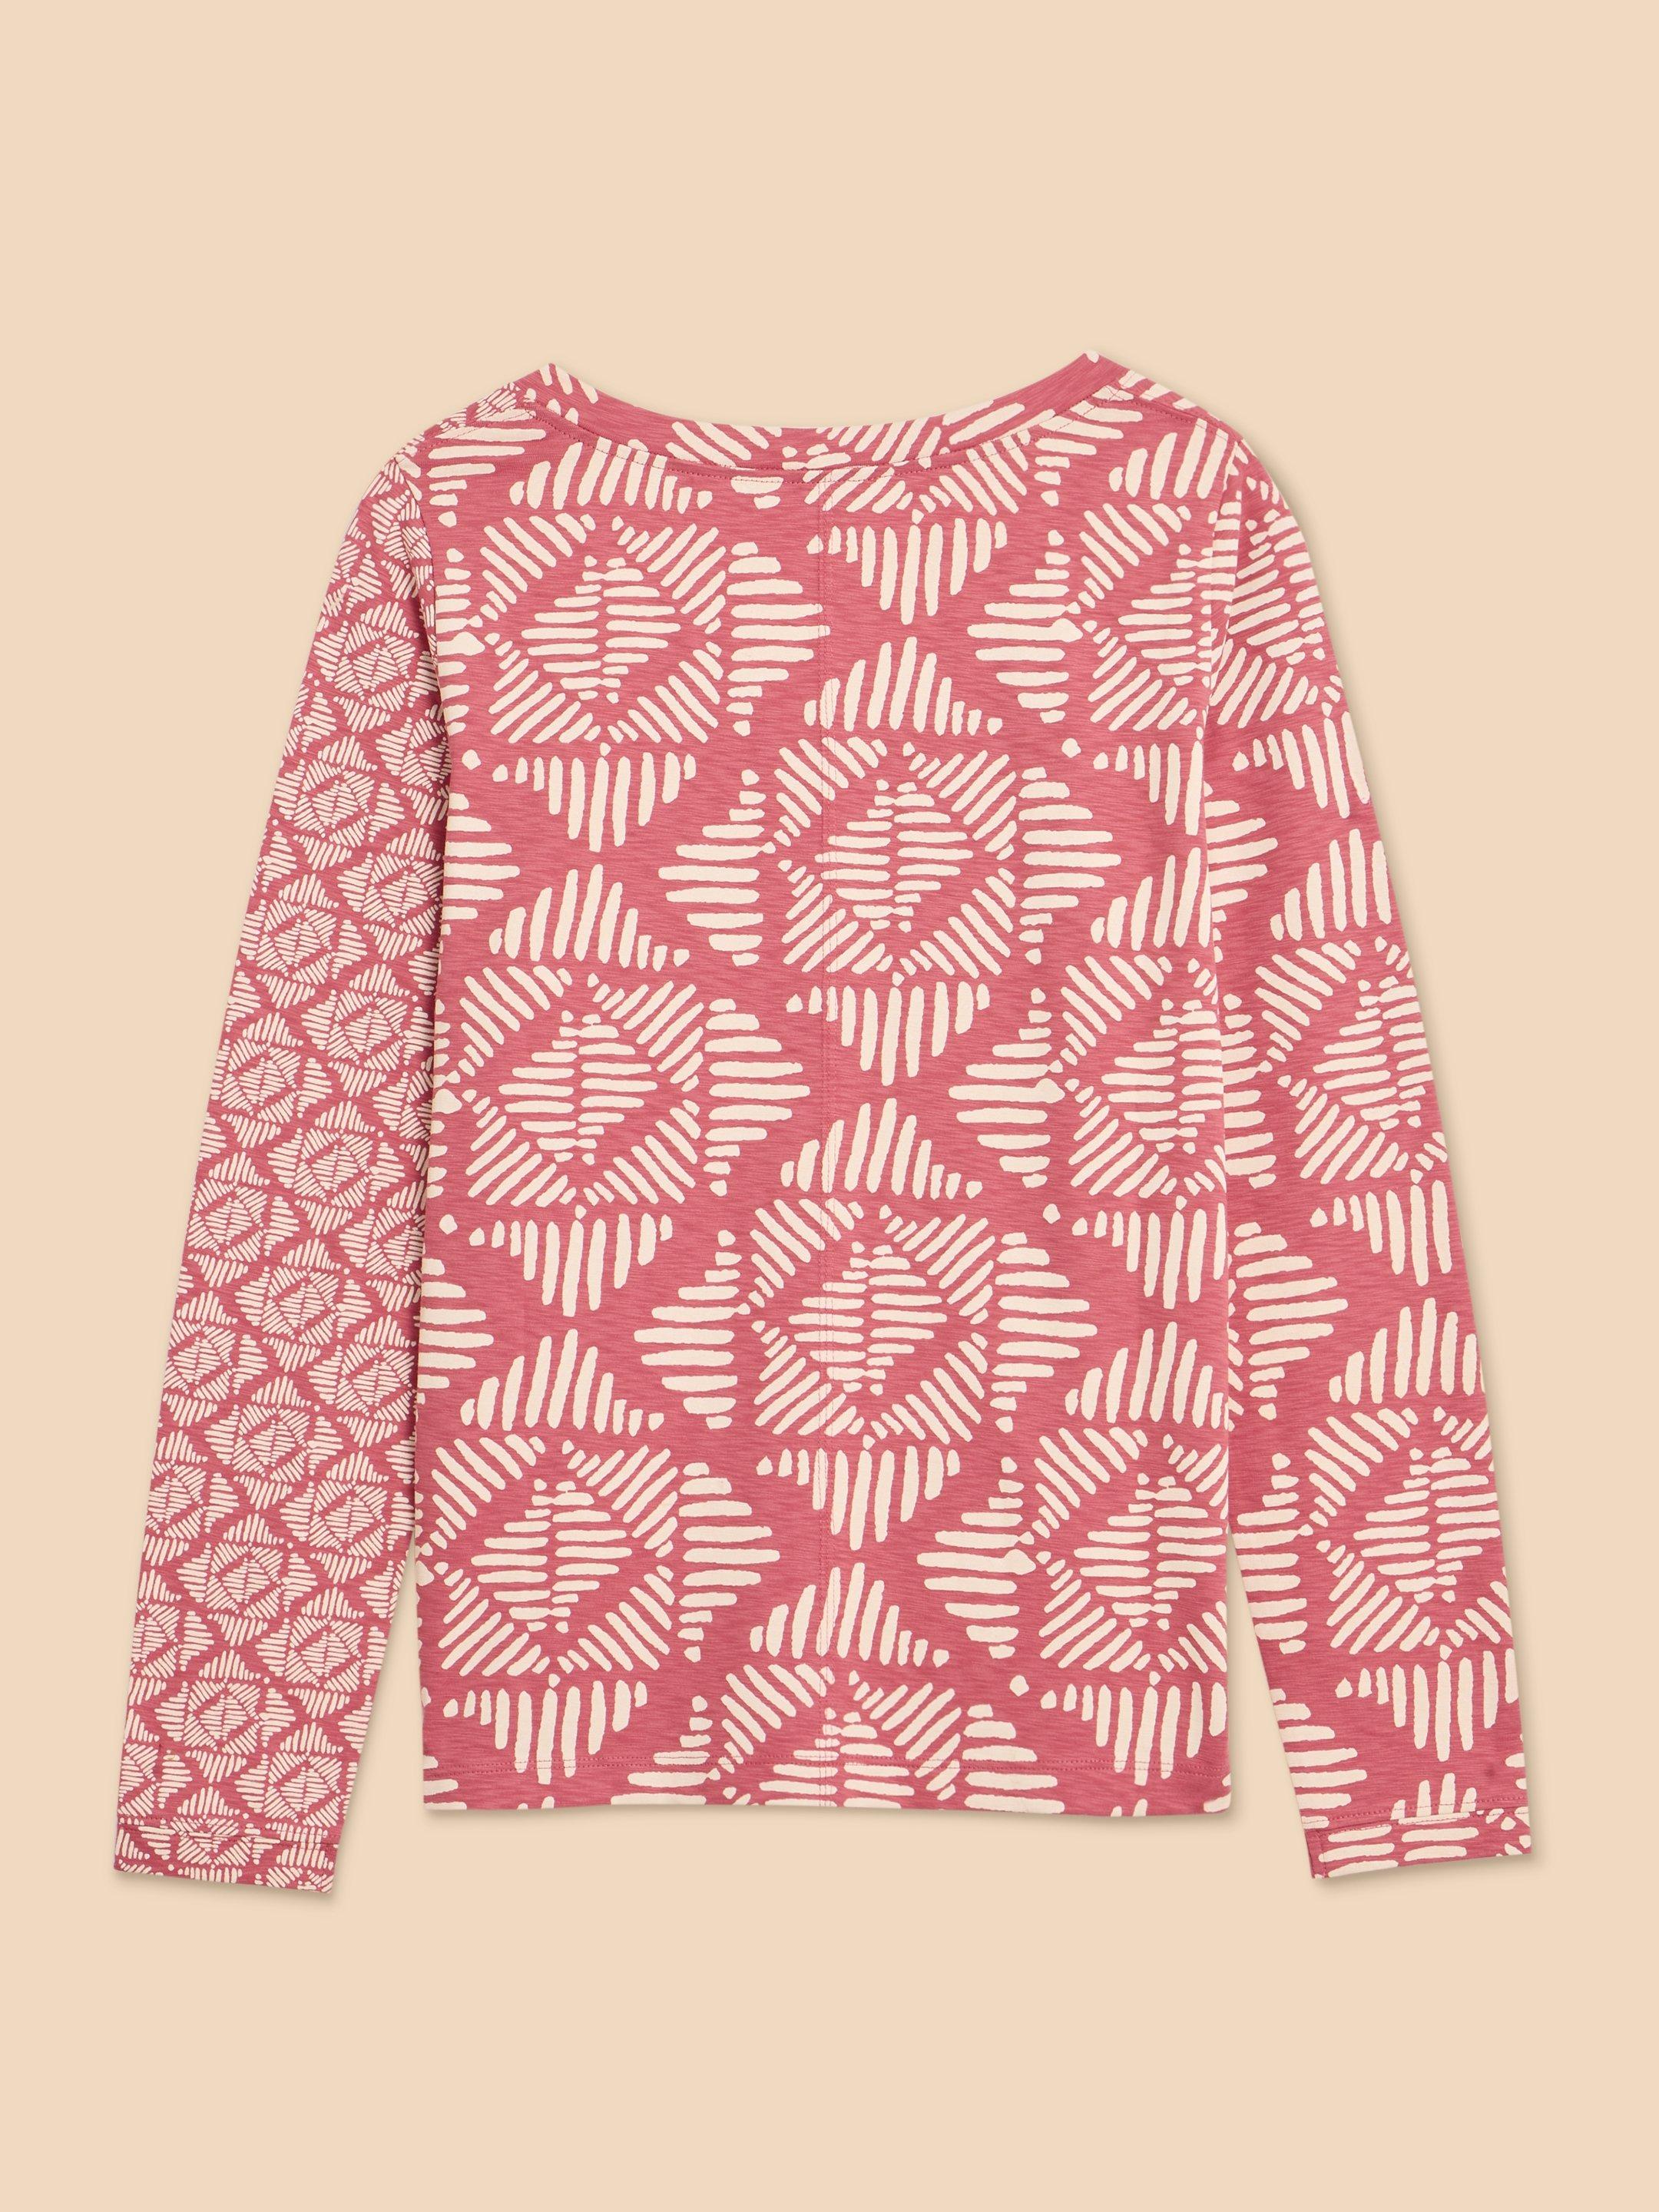 NELLY LS PRINTED TEE in PINK PR - FLAT BACK